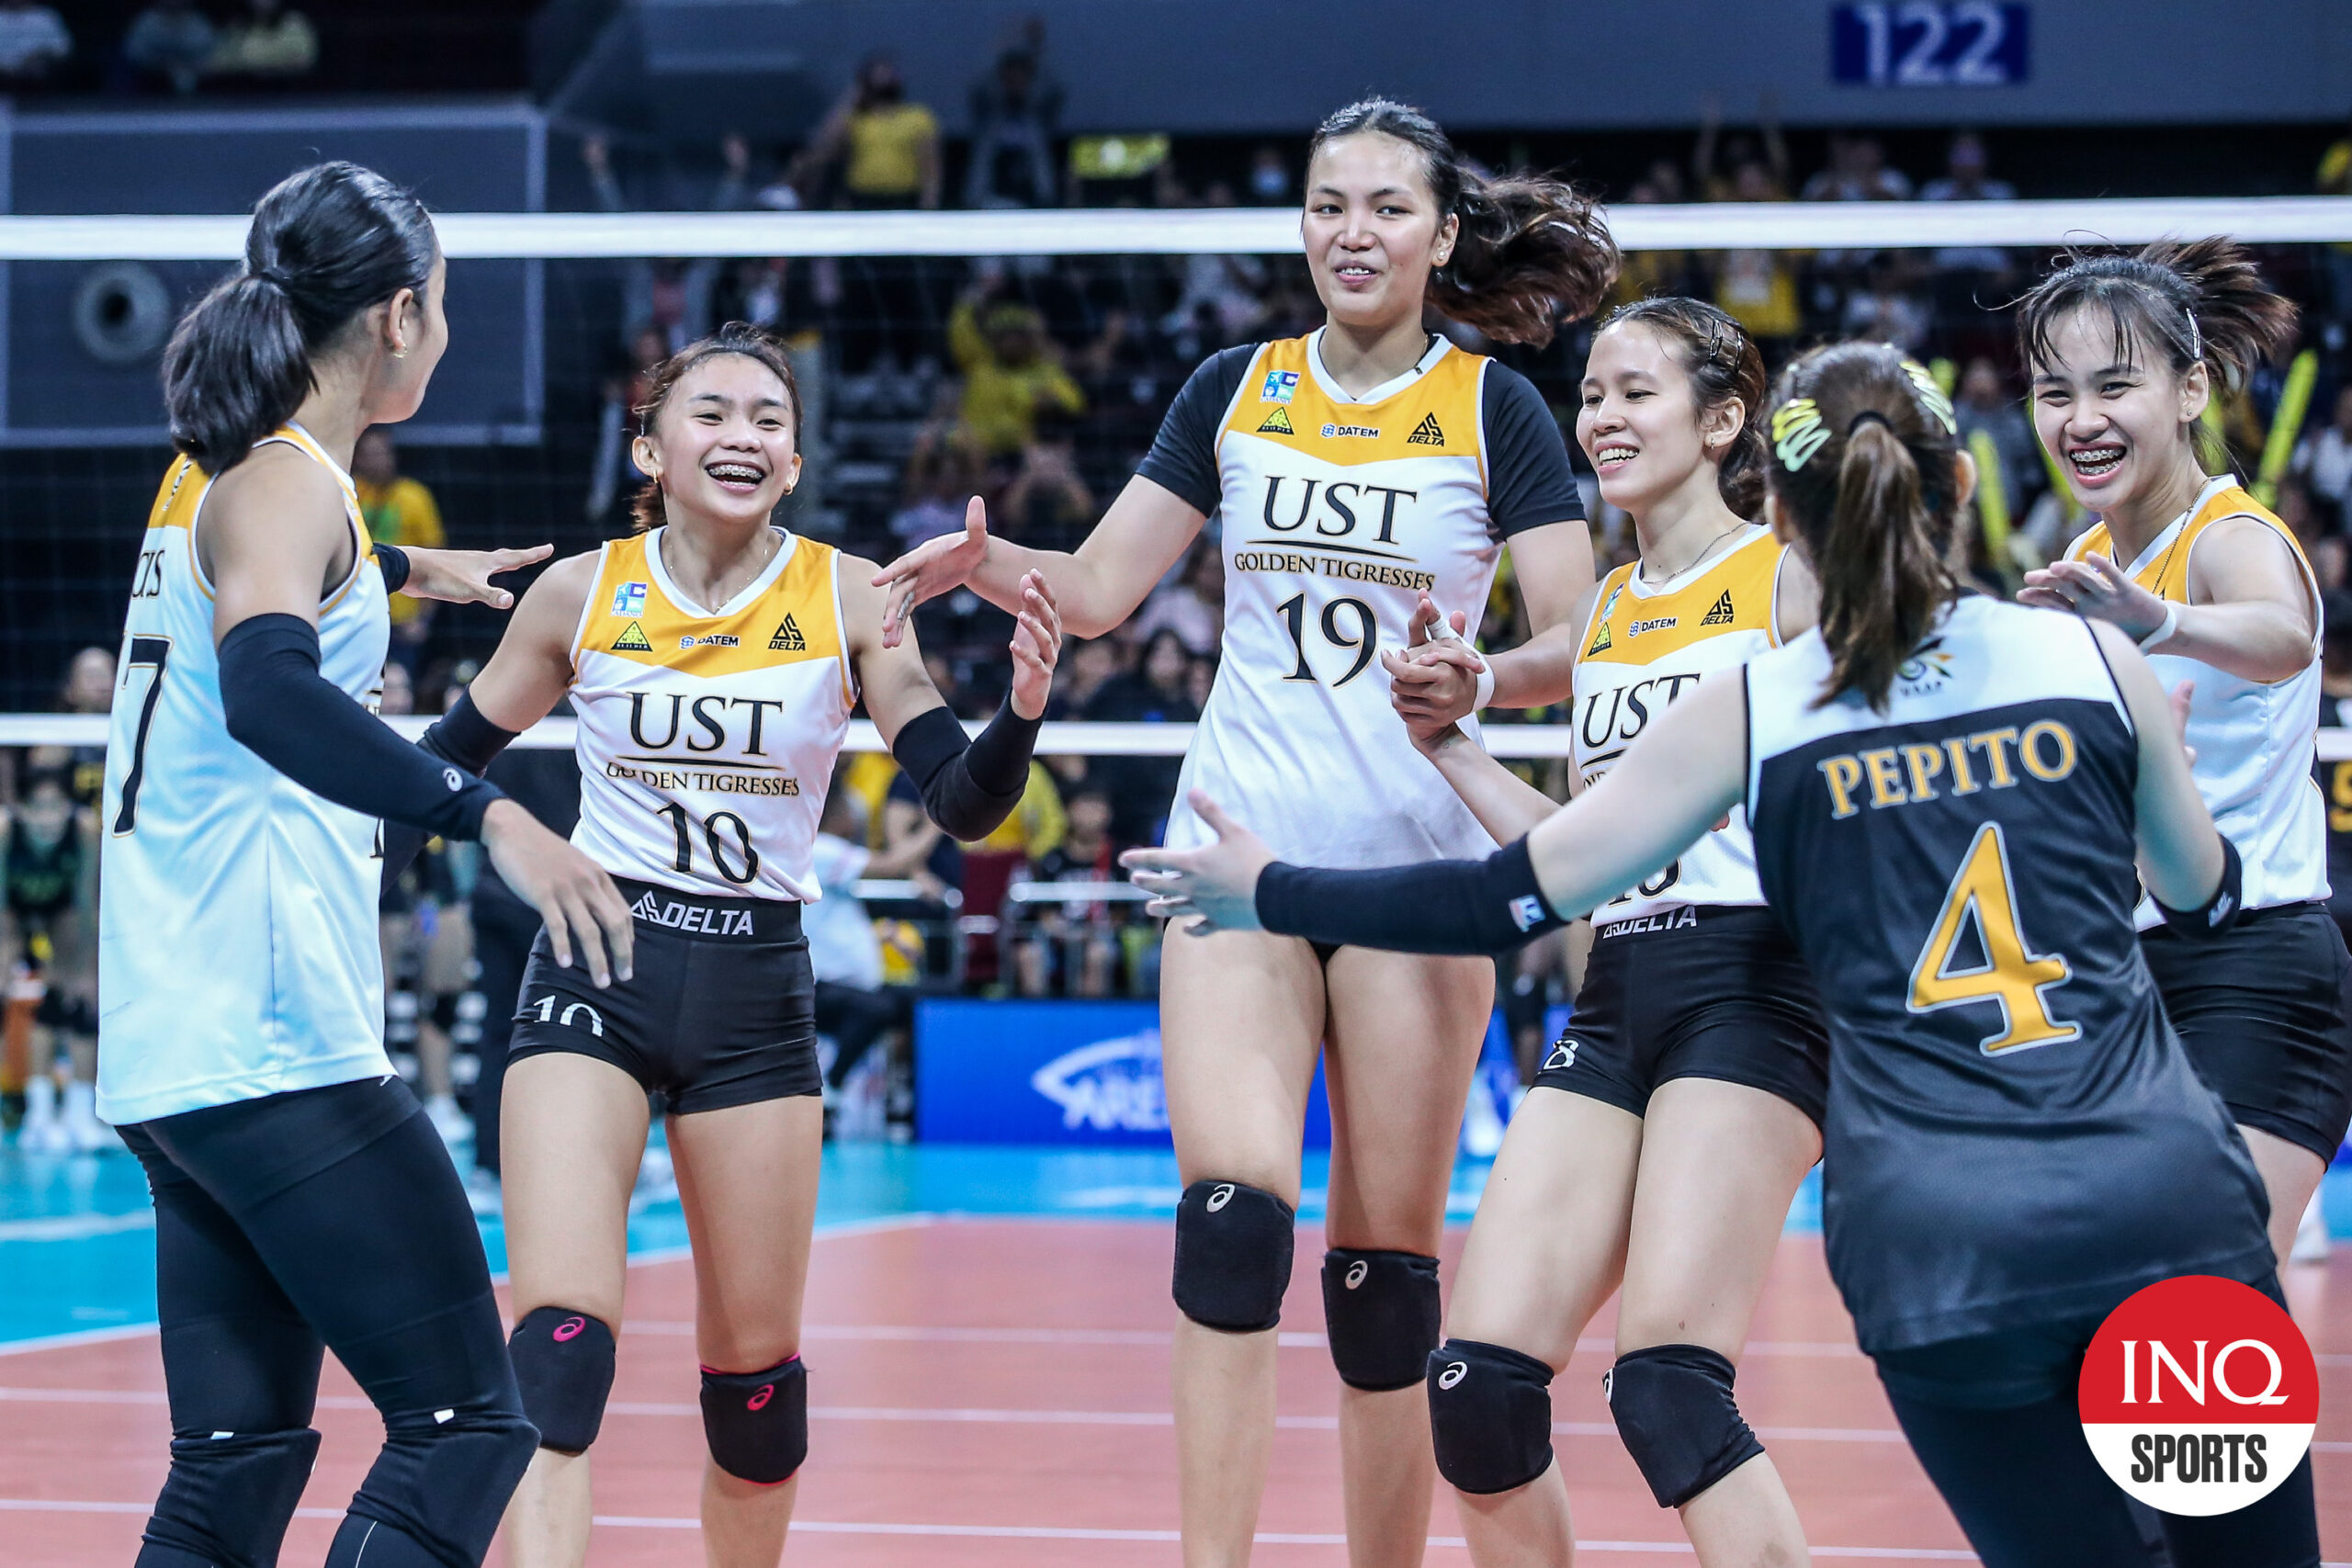 uaap volleyball: xyza gula rescues ust tigresses from near defeat